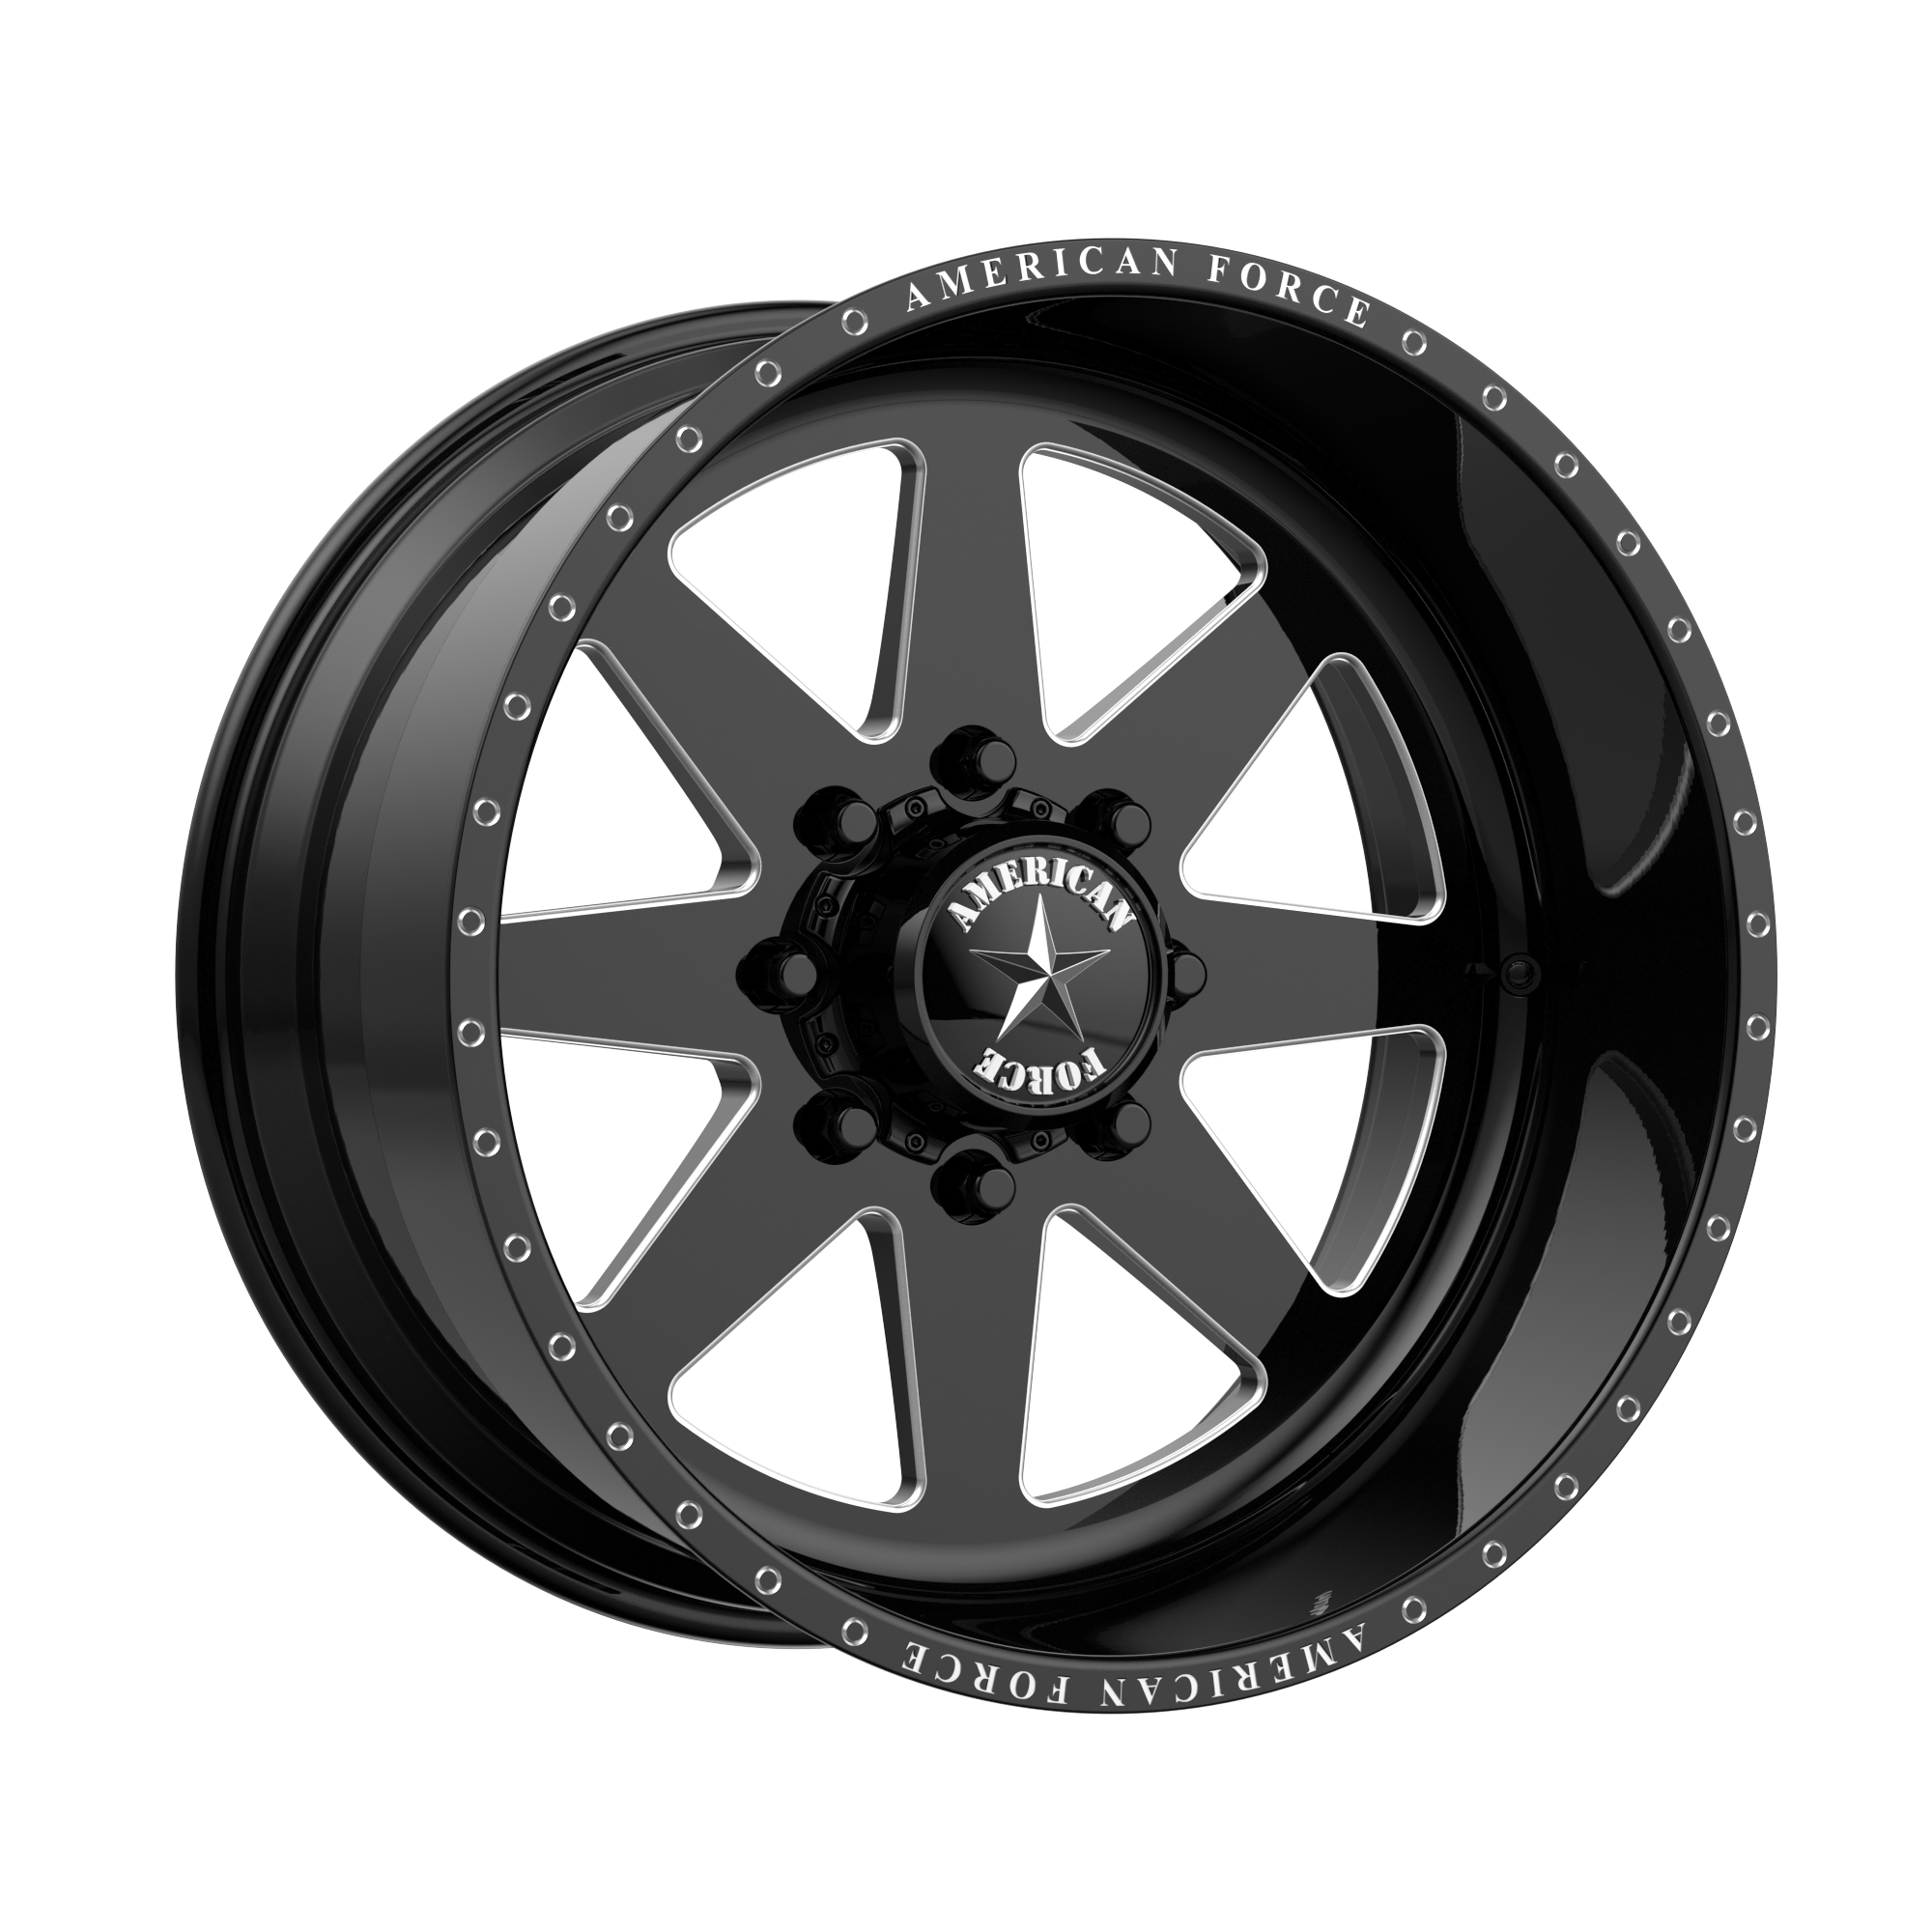 INDEPENDENCE SS 20x9 6x139.70 GLOSS BLACK MACHINED (0 mm) - Tires and Engine Performance